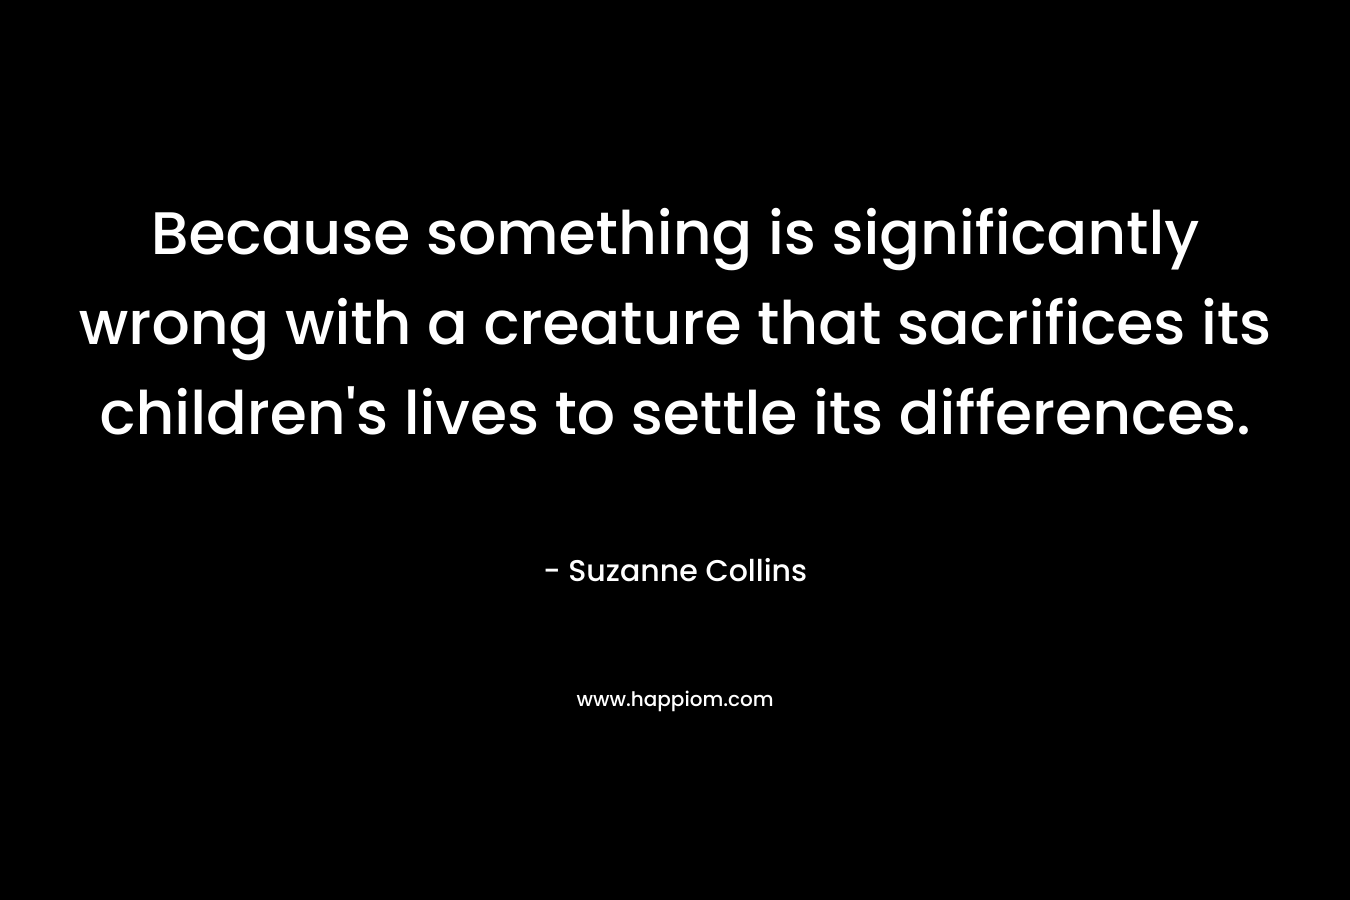 Because something is significantly wrong with a creature that sacrifices its children's lives to settle its differences.